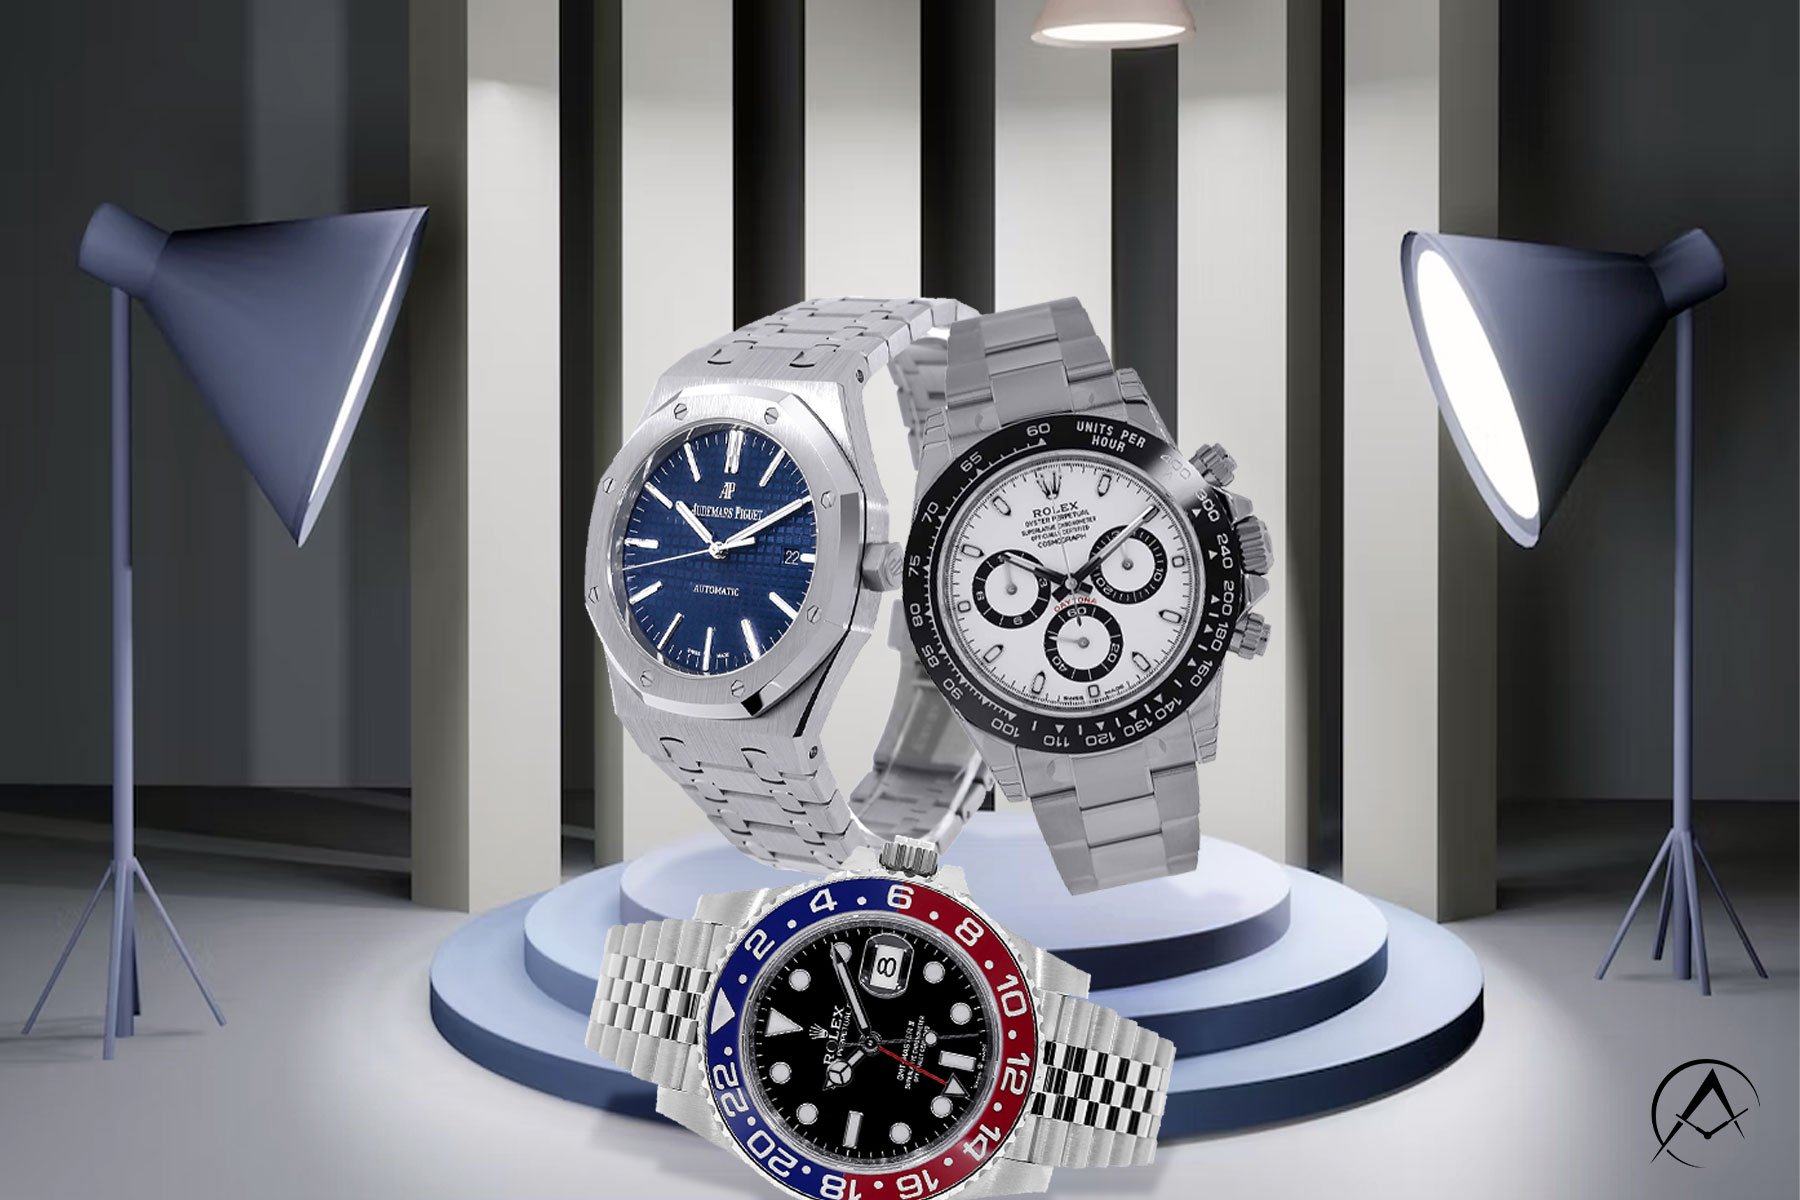 3 Sterling Silver Audemars Piguet, Patek Philippe, and Rolex Timepieces are Displayed on a Blue Platform with 4 Lights Spotlighting Them